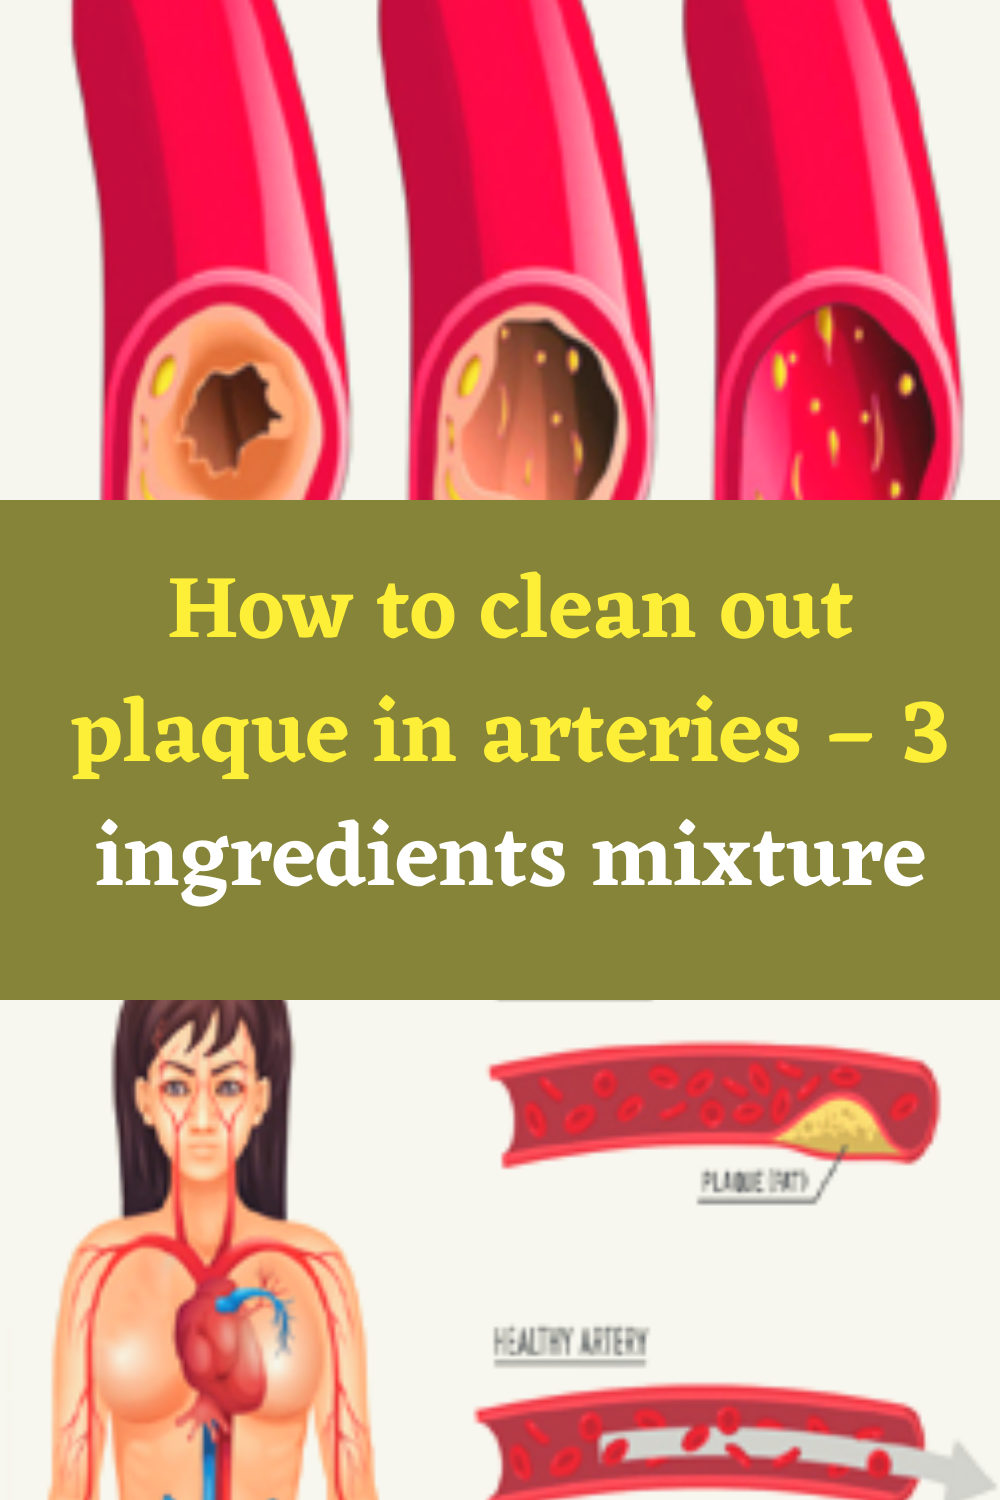 How To Clean Out Plaque In Arteries 3 Ingredients Mixture